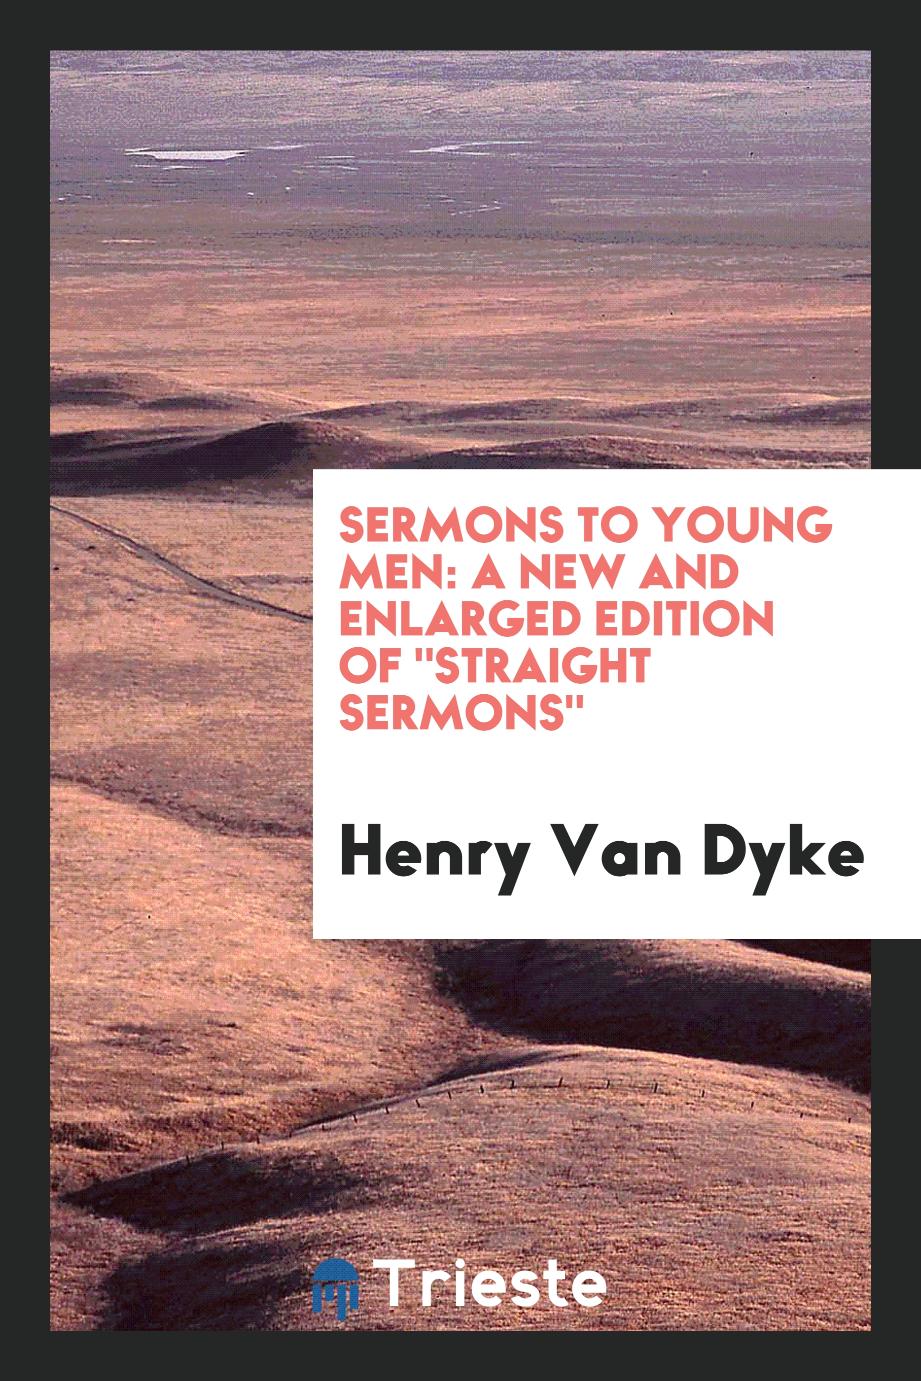 Sermons to young men: a new and enlarged edition of "Straight sermons"